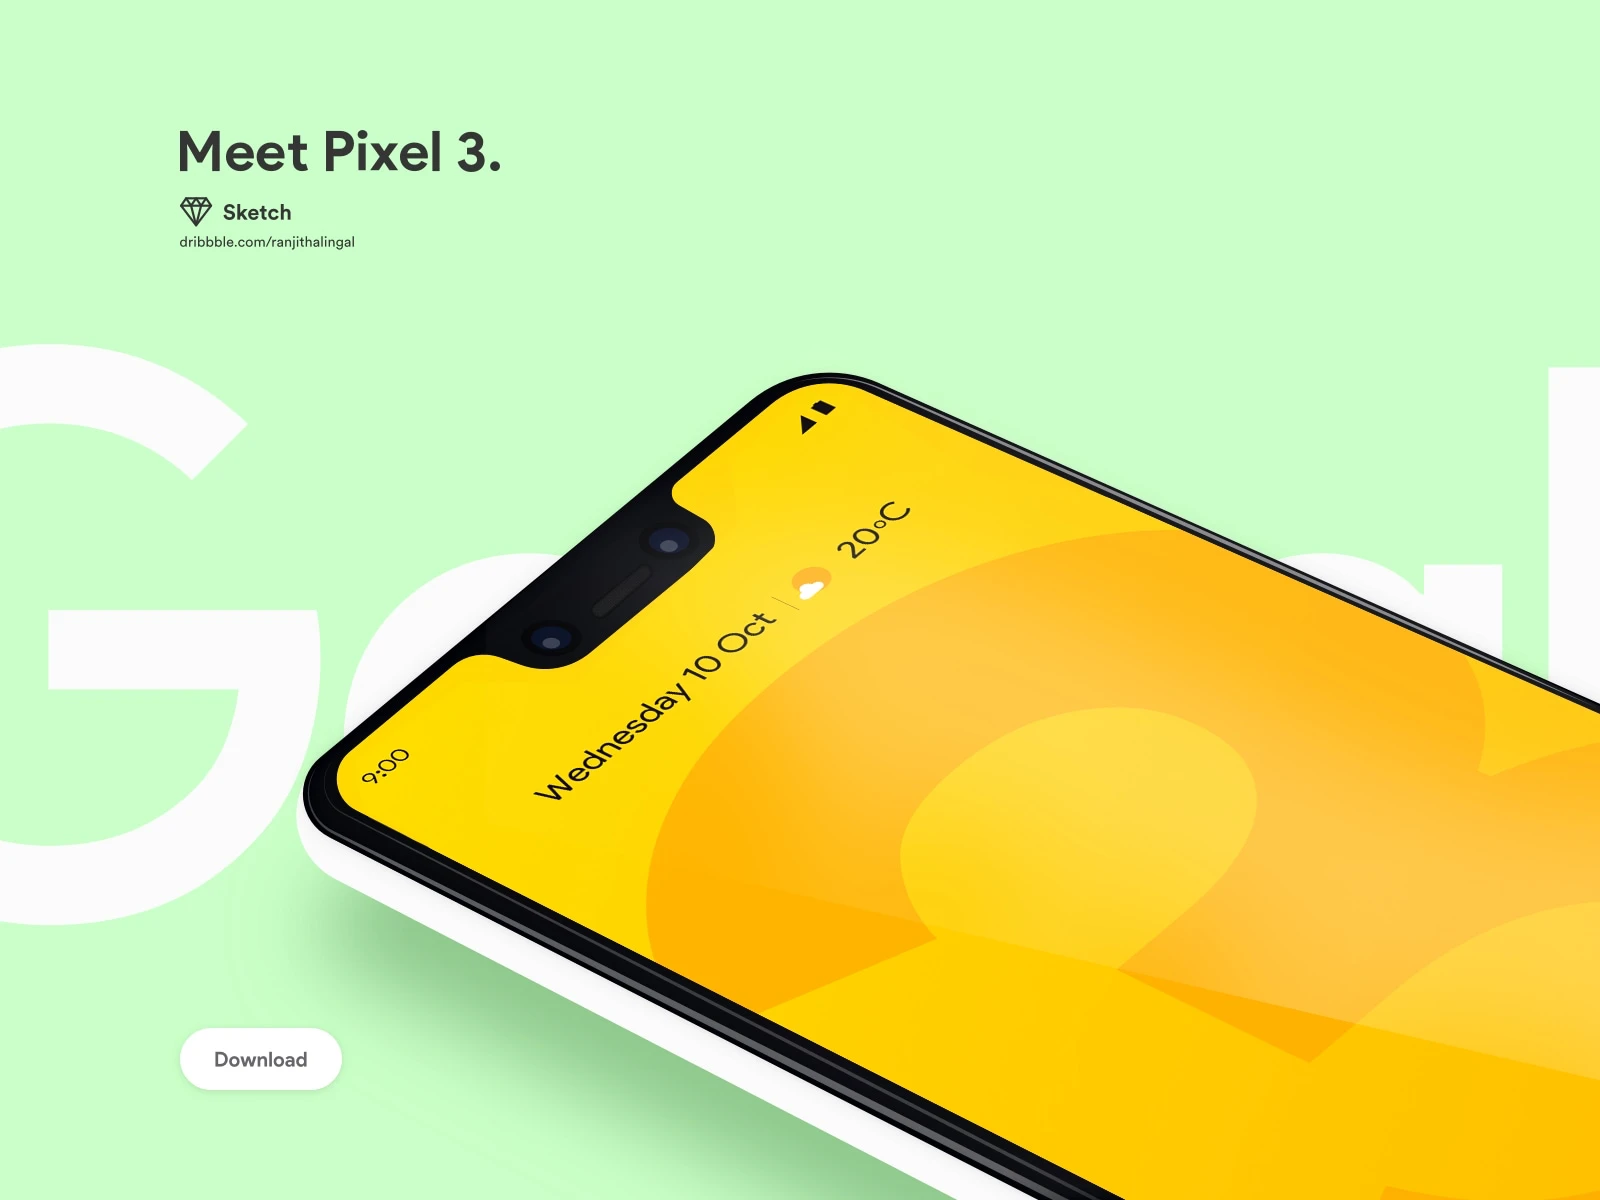 Google Pixel 3 Mockup - Using this free Google Pixel 3 Mockup Sketch file you can showcase your app design, presentation or add your own screenshots easily in Sketch. Pixel 3 Mockup is not only free but also have the premium look which makes your mobile UI design presentation stand out from the crowd!